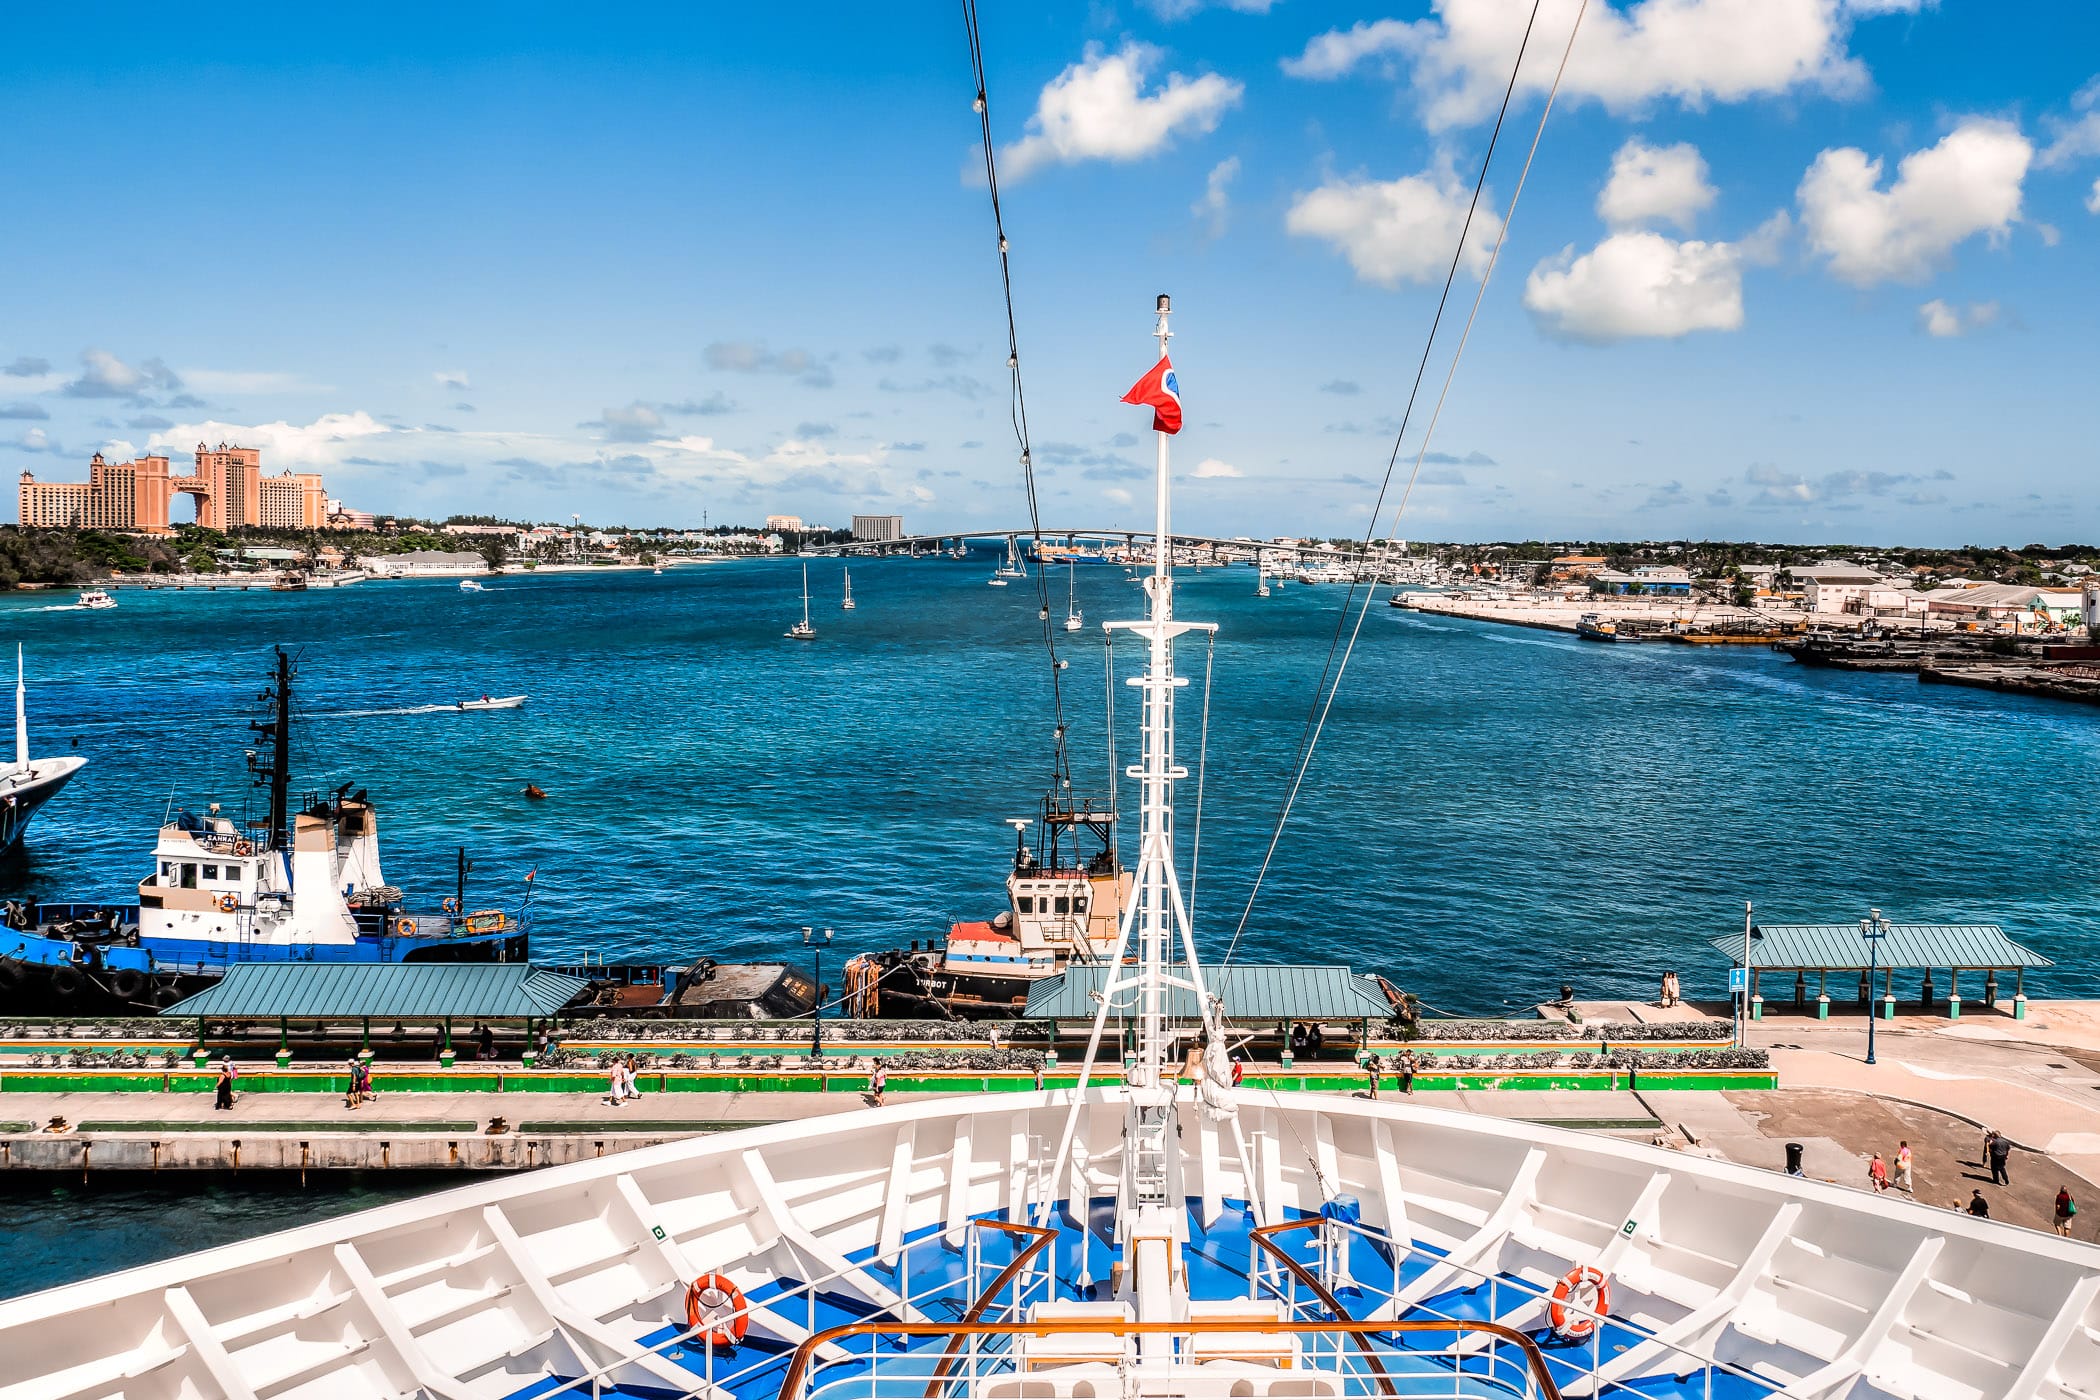 A view of Nassau, Bahamas' harbor, as seen from the bow of the cruise ship Carnival Magic, docked at the cruise terminal.